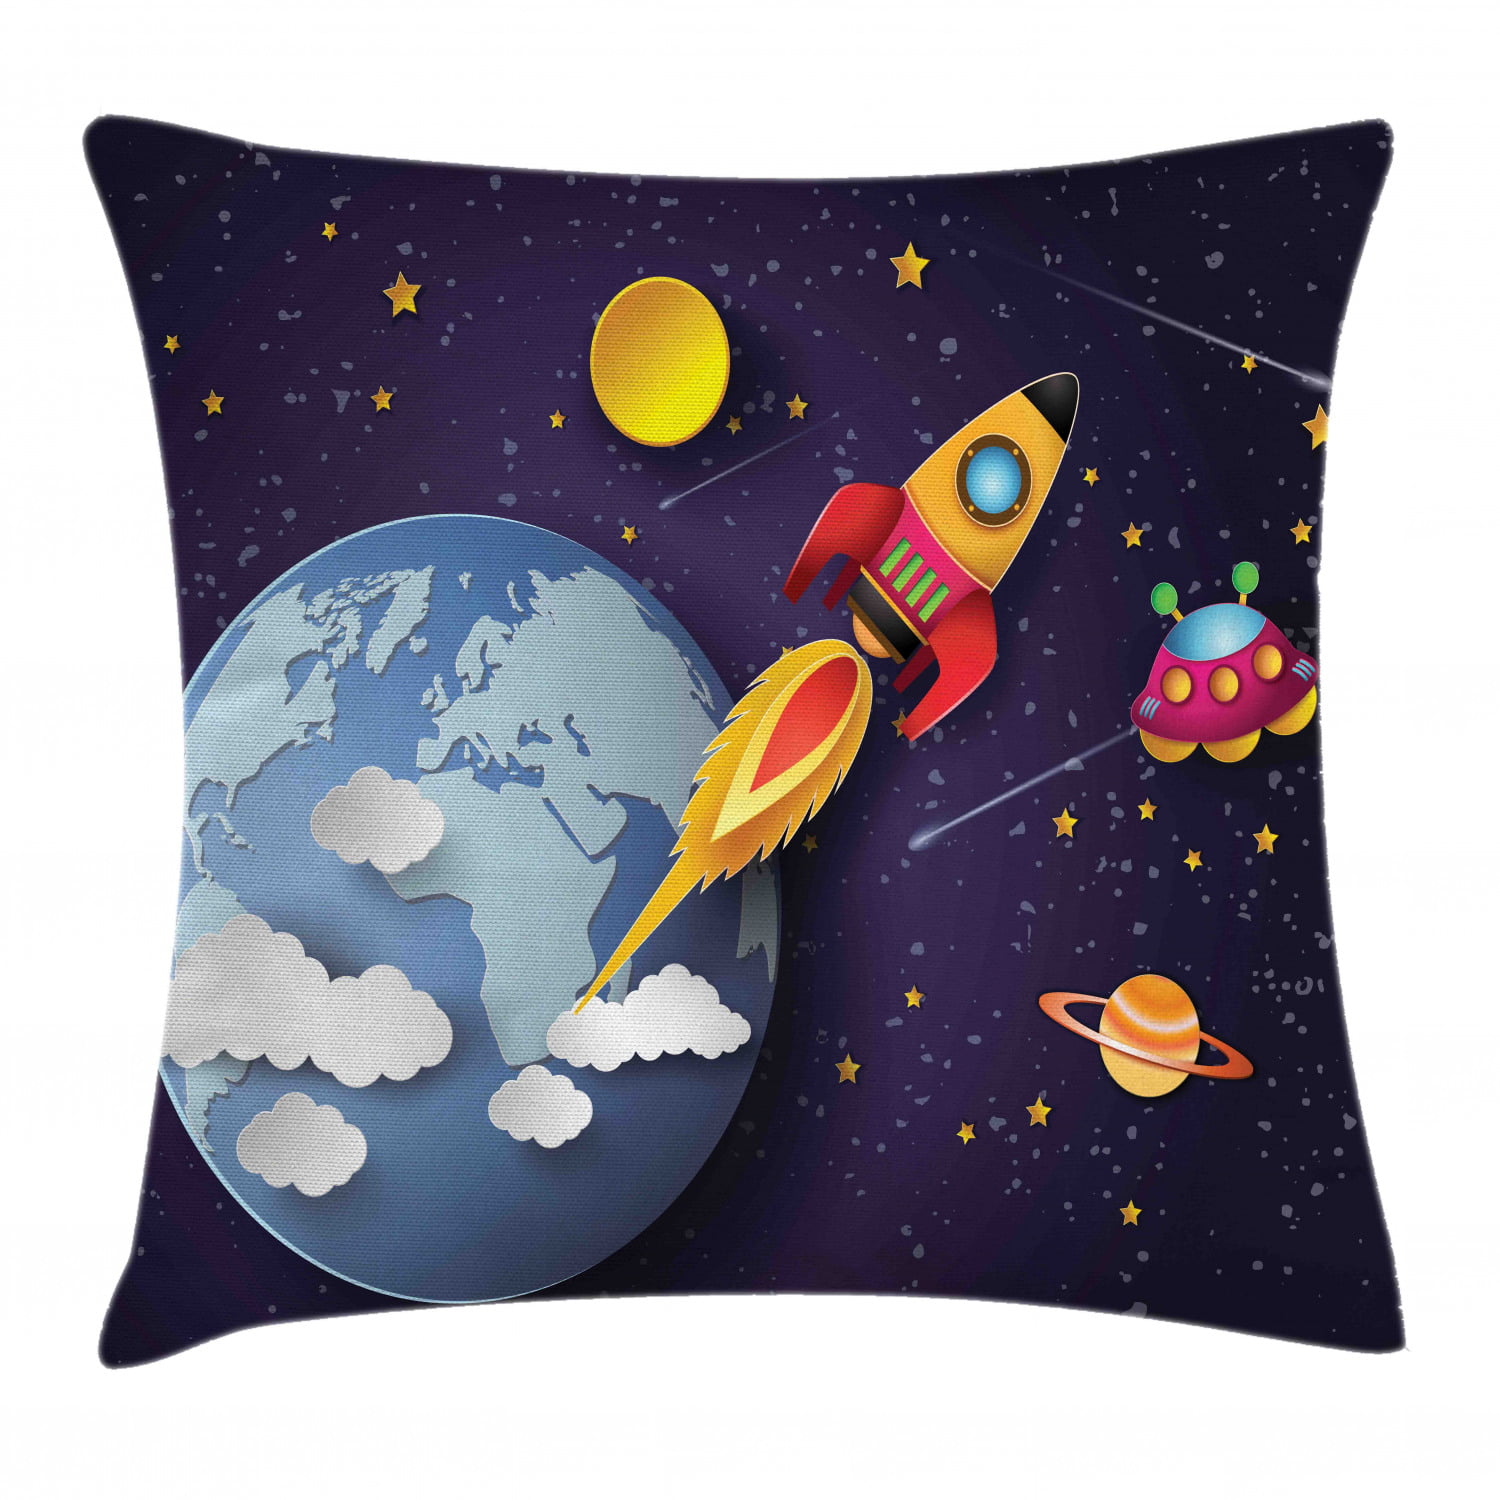 Outer Space Throw Pillow Cushion Cover, Rocket on Planetary System with ...